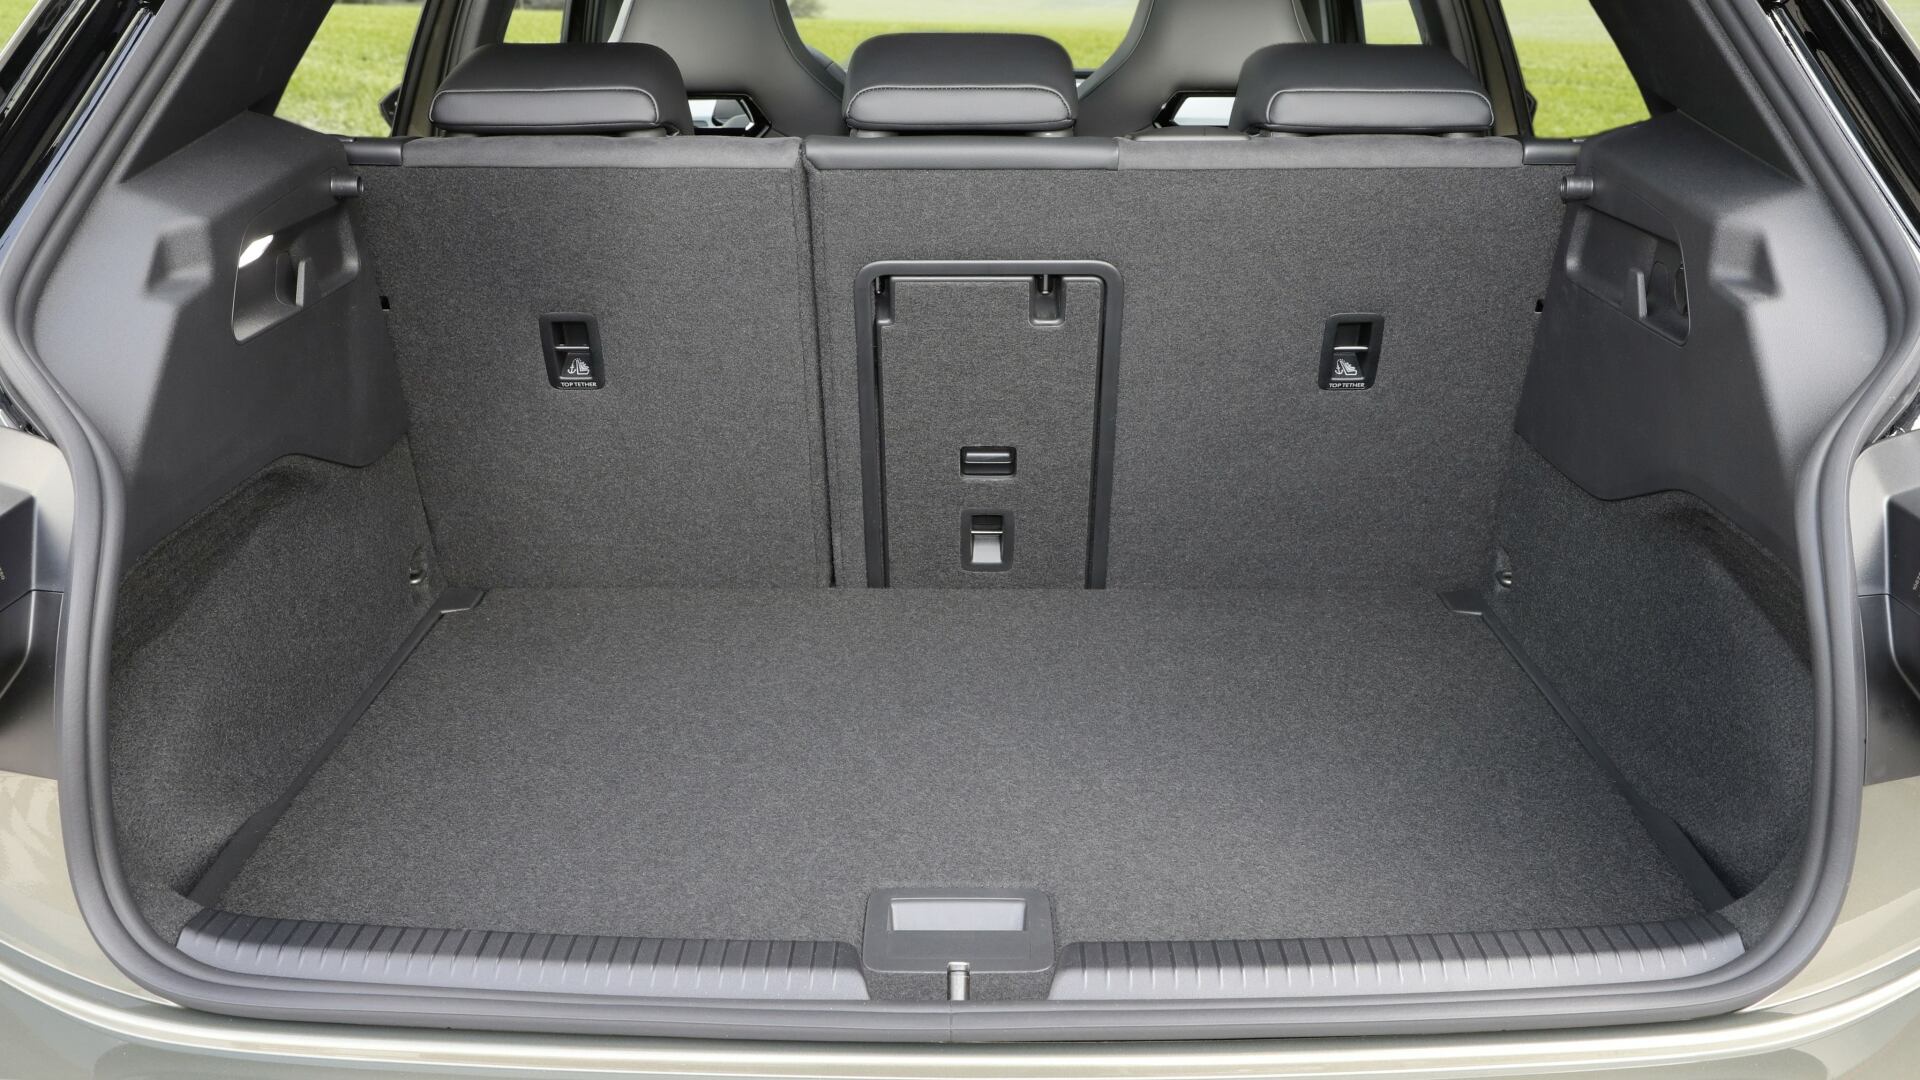 The Boot Space That Comes With The New Volkswagen ID.3 Pro S (Credits Volkswagen Newsroom)